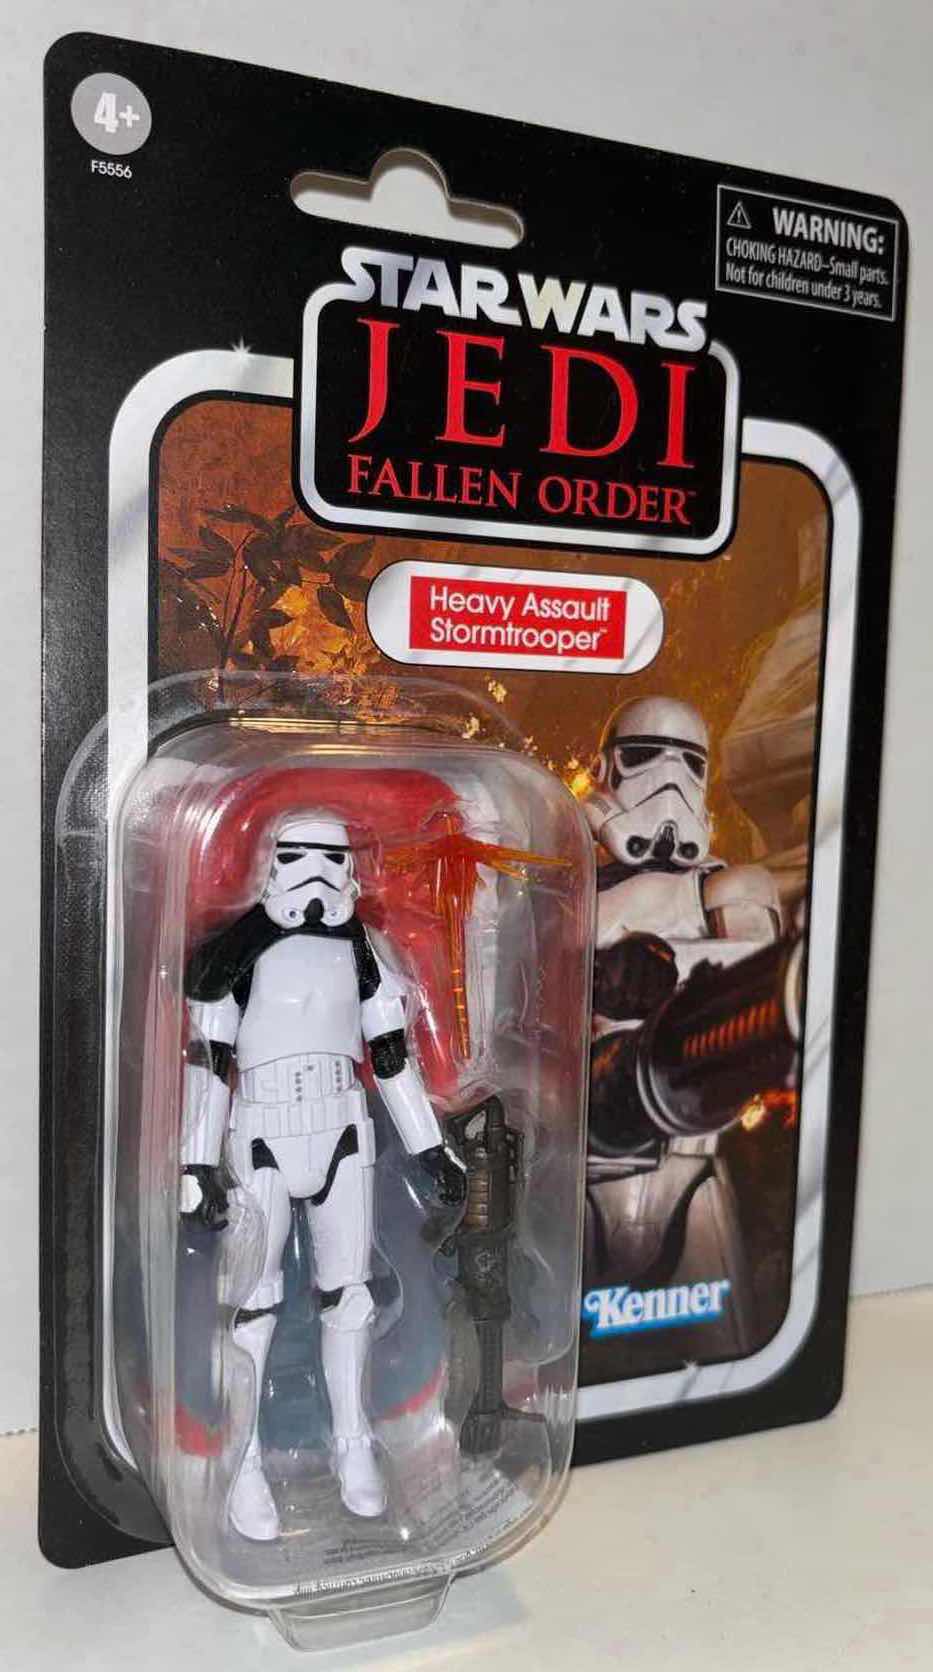 Photo 1 of NEW STAR WARS JEDI FALLEN ORDER 3.75” THE VINTAGE COLLECTION ACTION FIGURE & ACCESSORIES, “HEAVY ASSAULT STORMTROOPER��” (1)